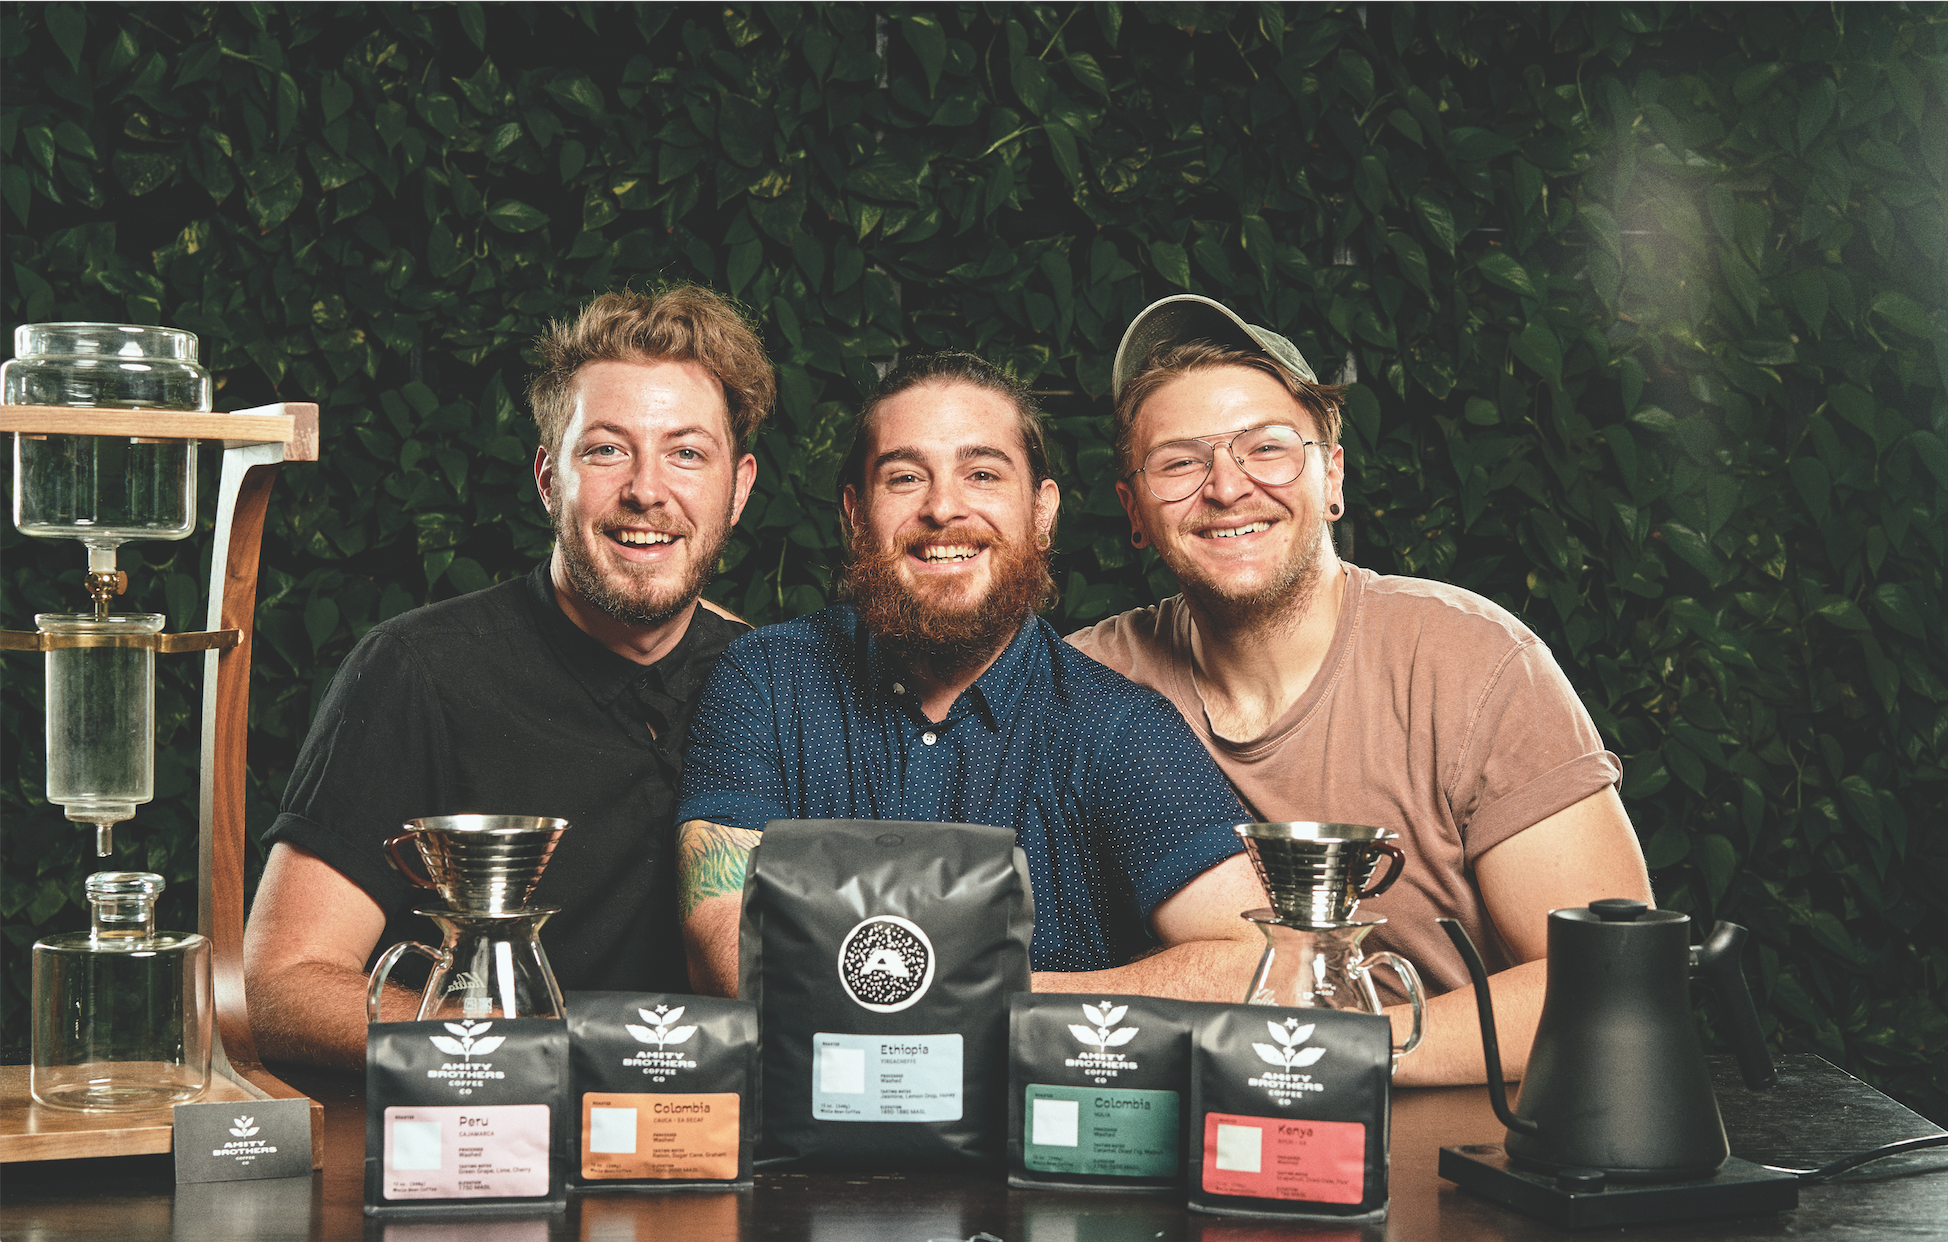 Three stooges, Christopher LeMaster, Chase Bryner and Ryan Parker of Amity Bros. keep it light, even for dark roasts.